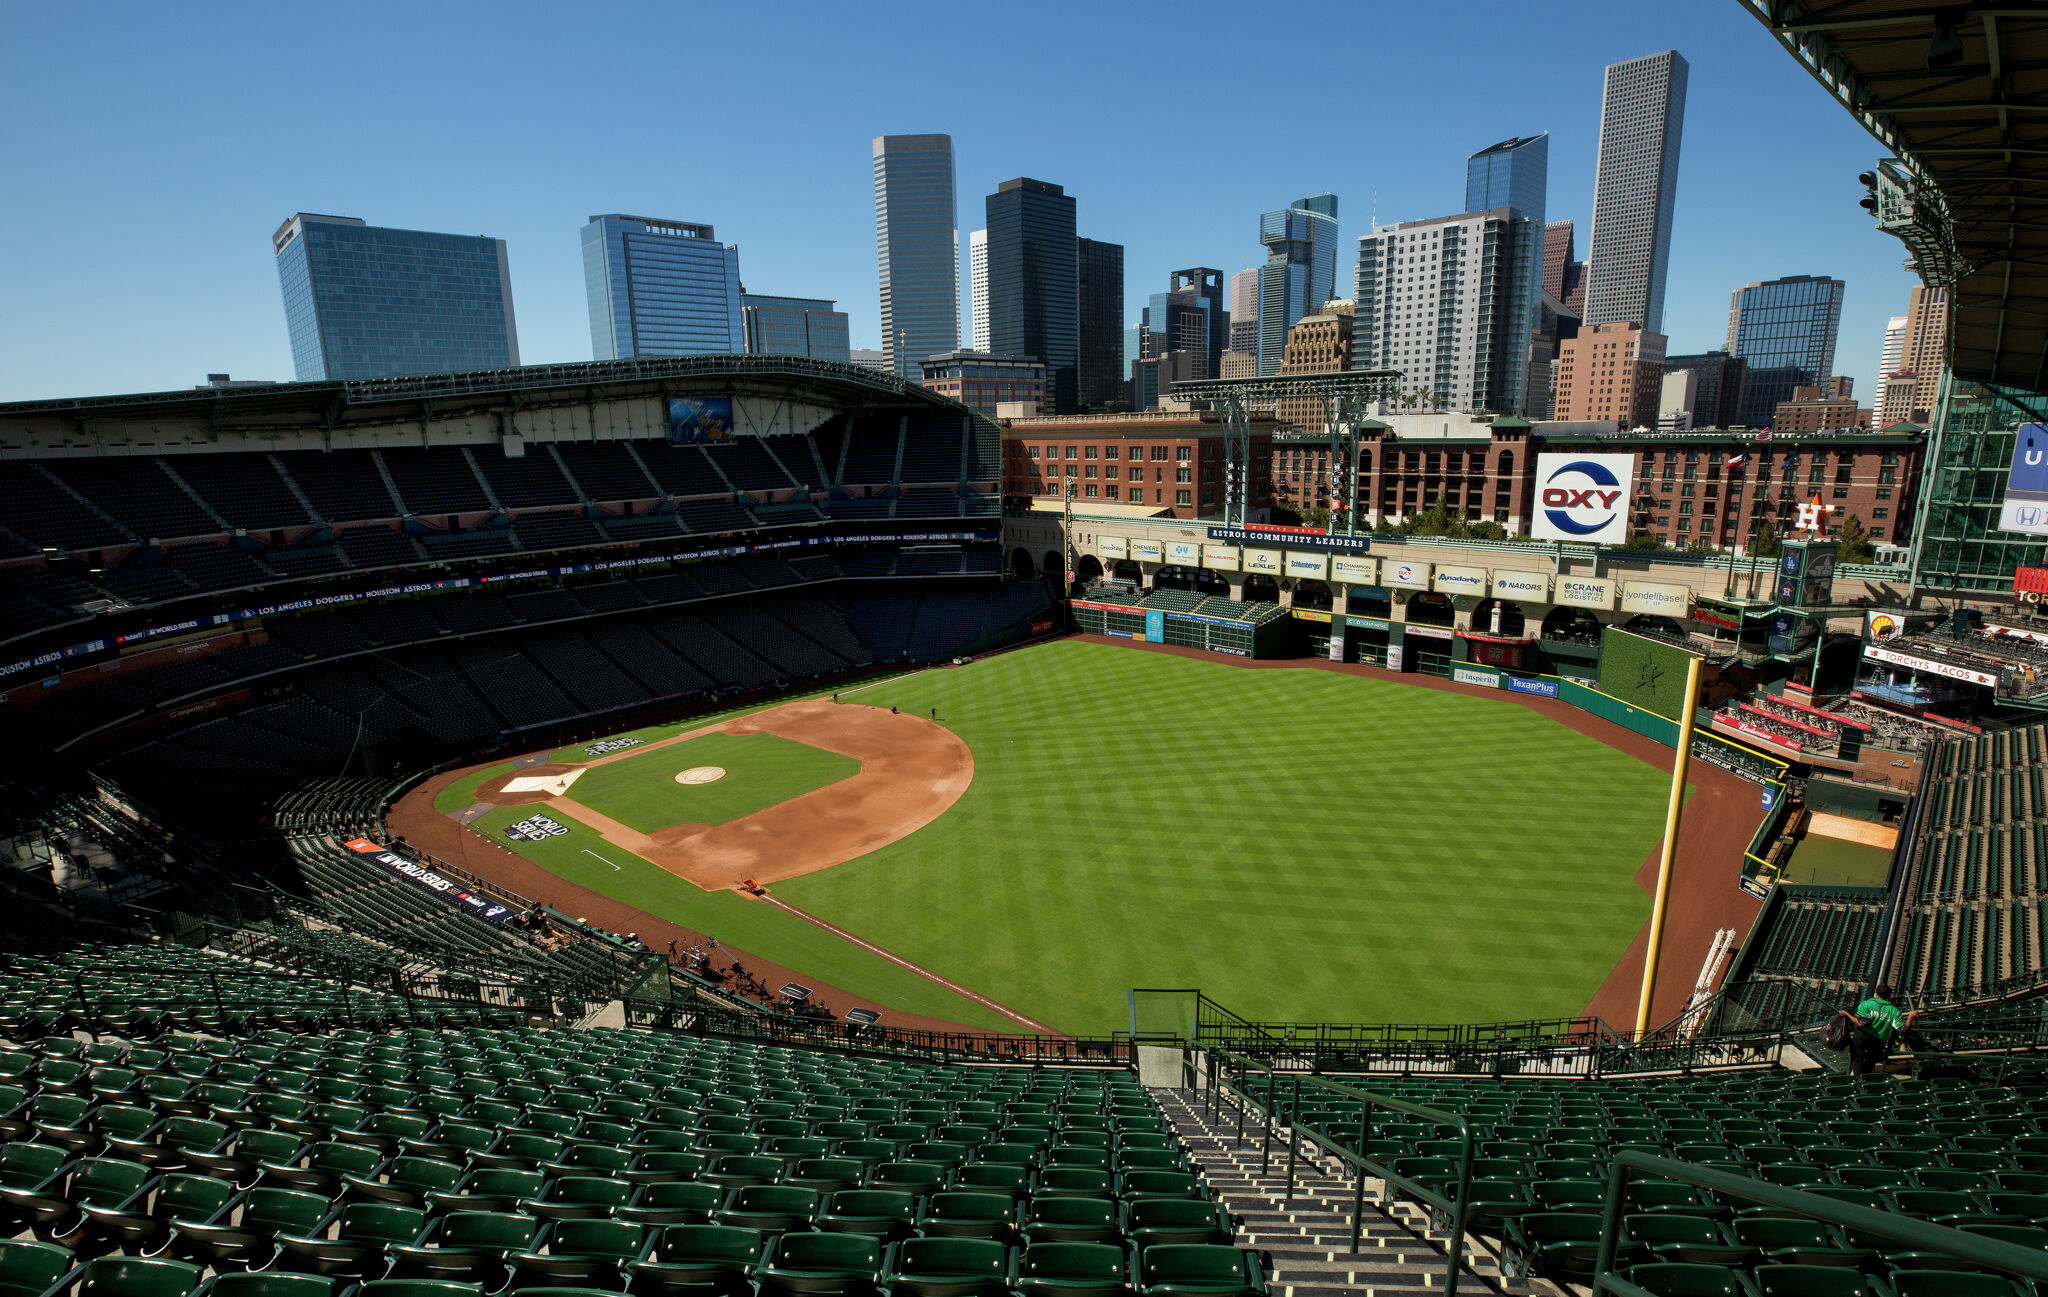 Minute Maid Park roof will be closed for Game 6 of World Series